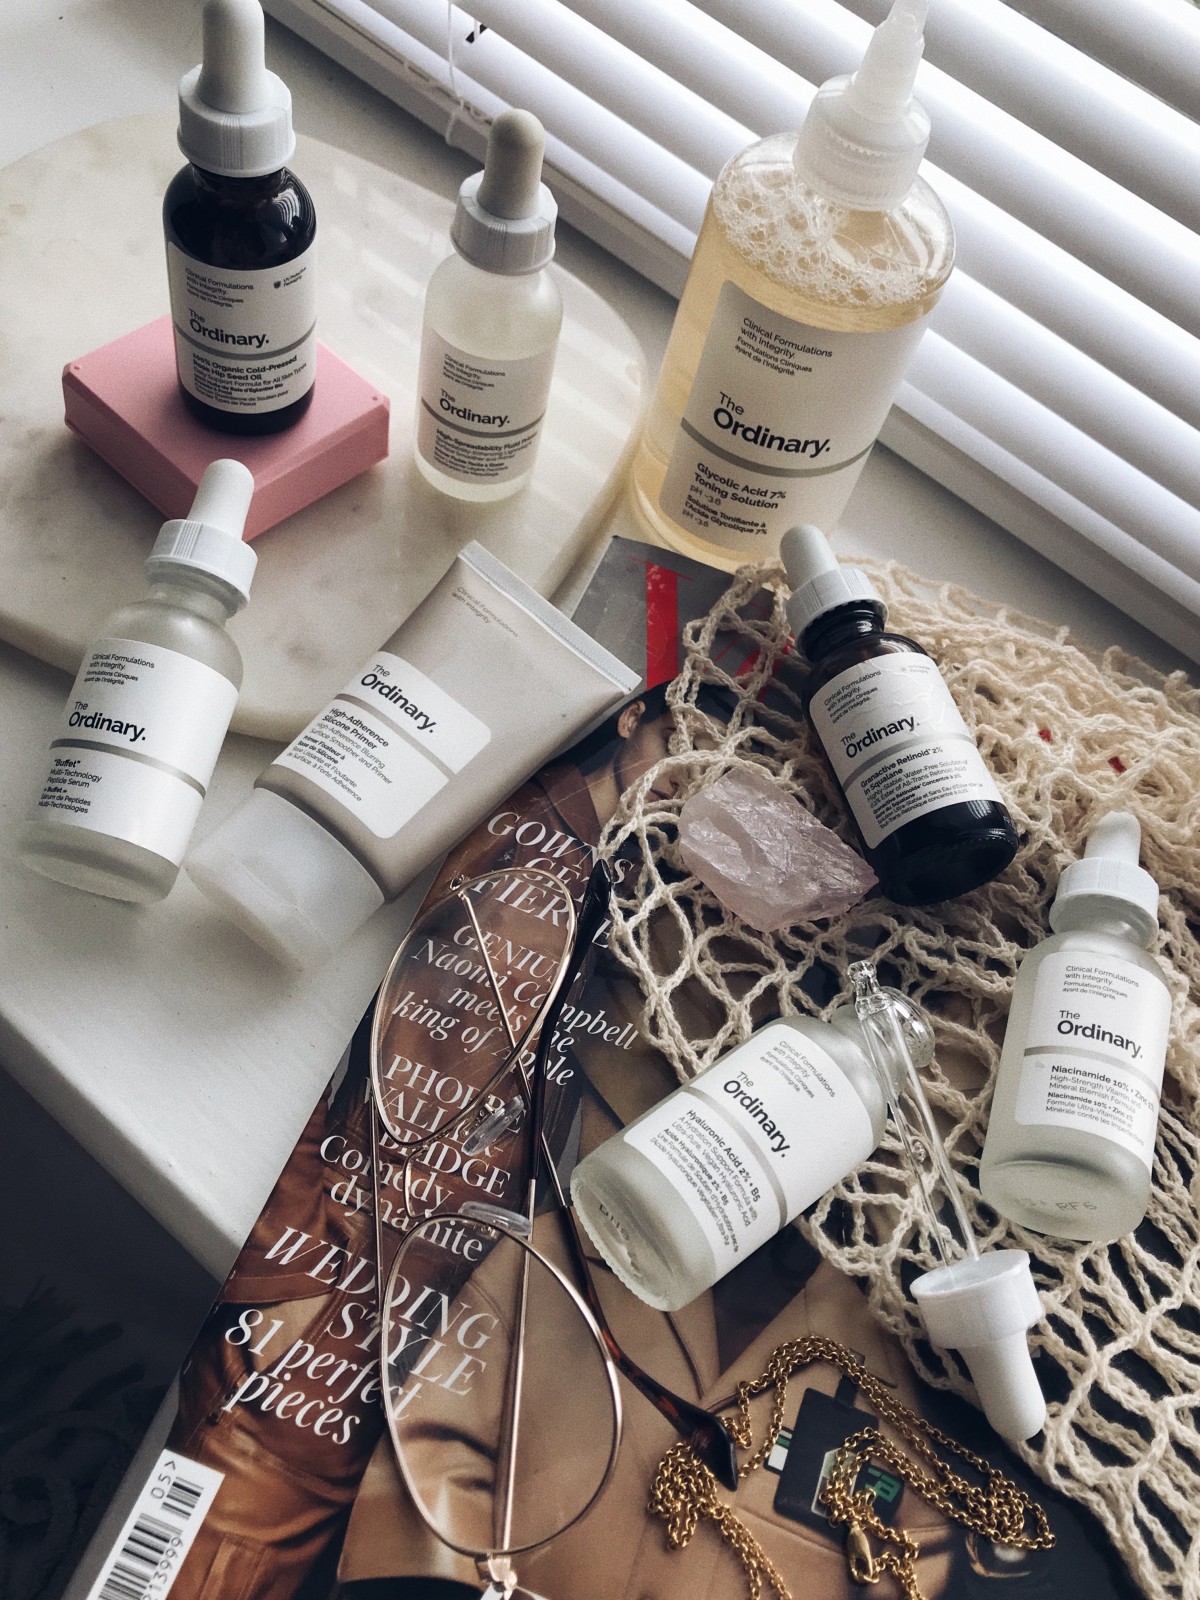 The Ordinary Skincare Overview and Haul